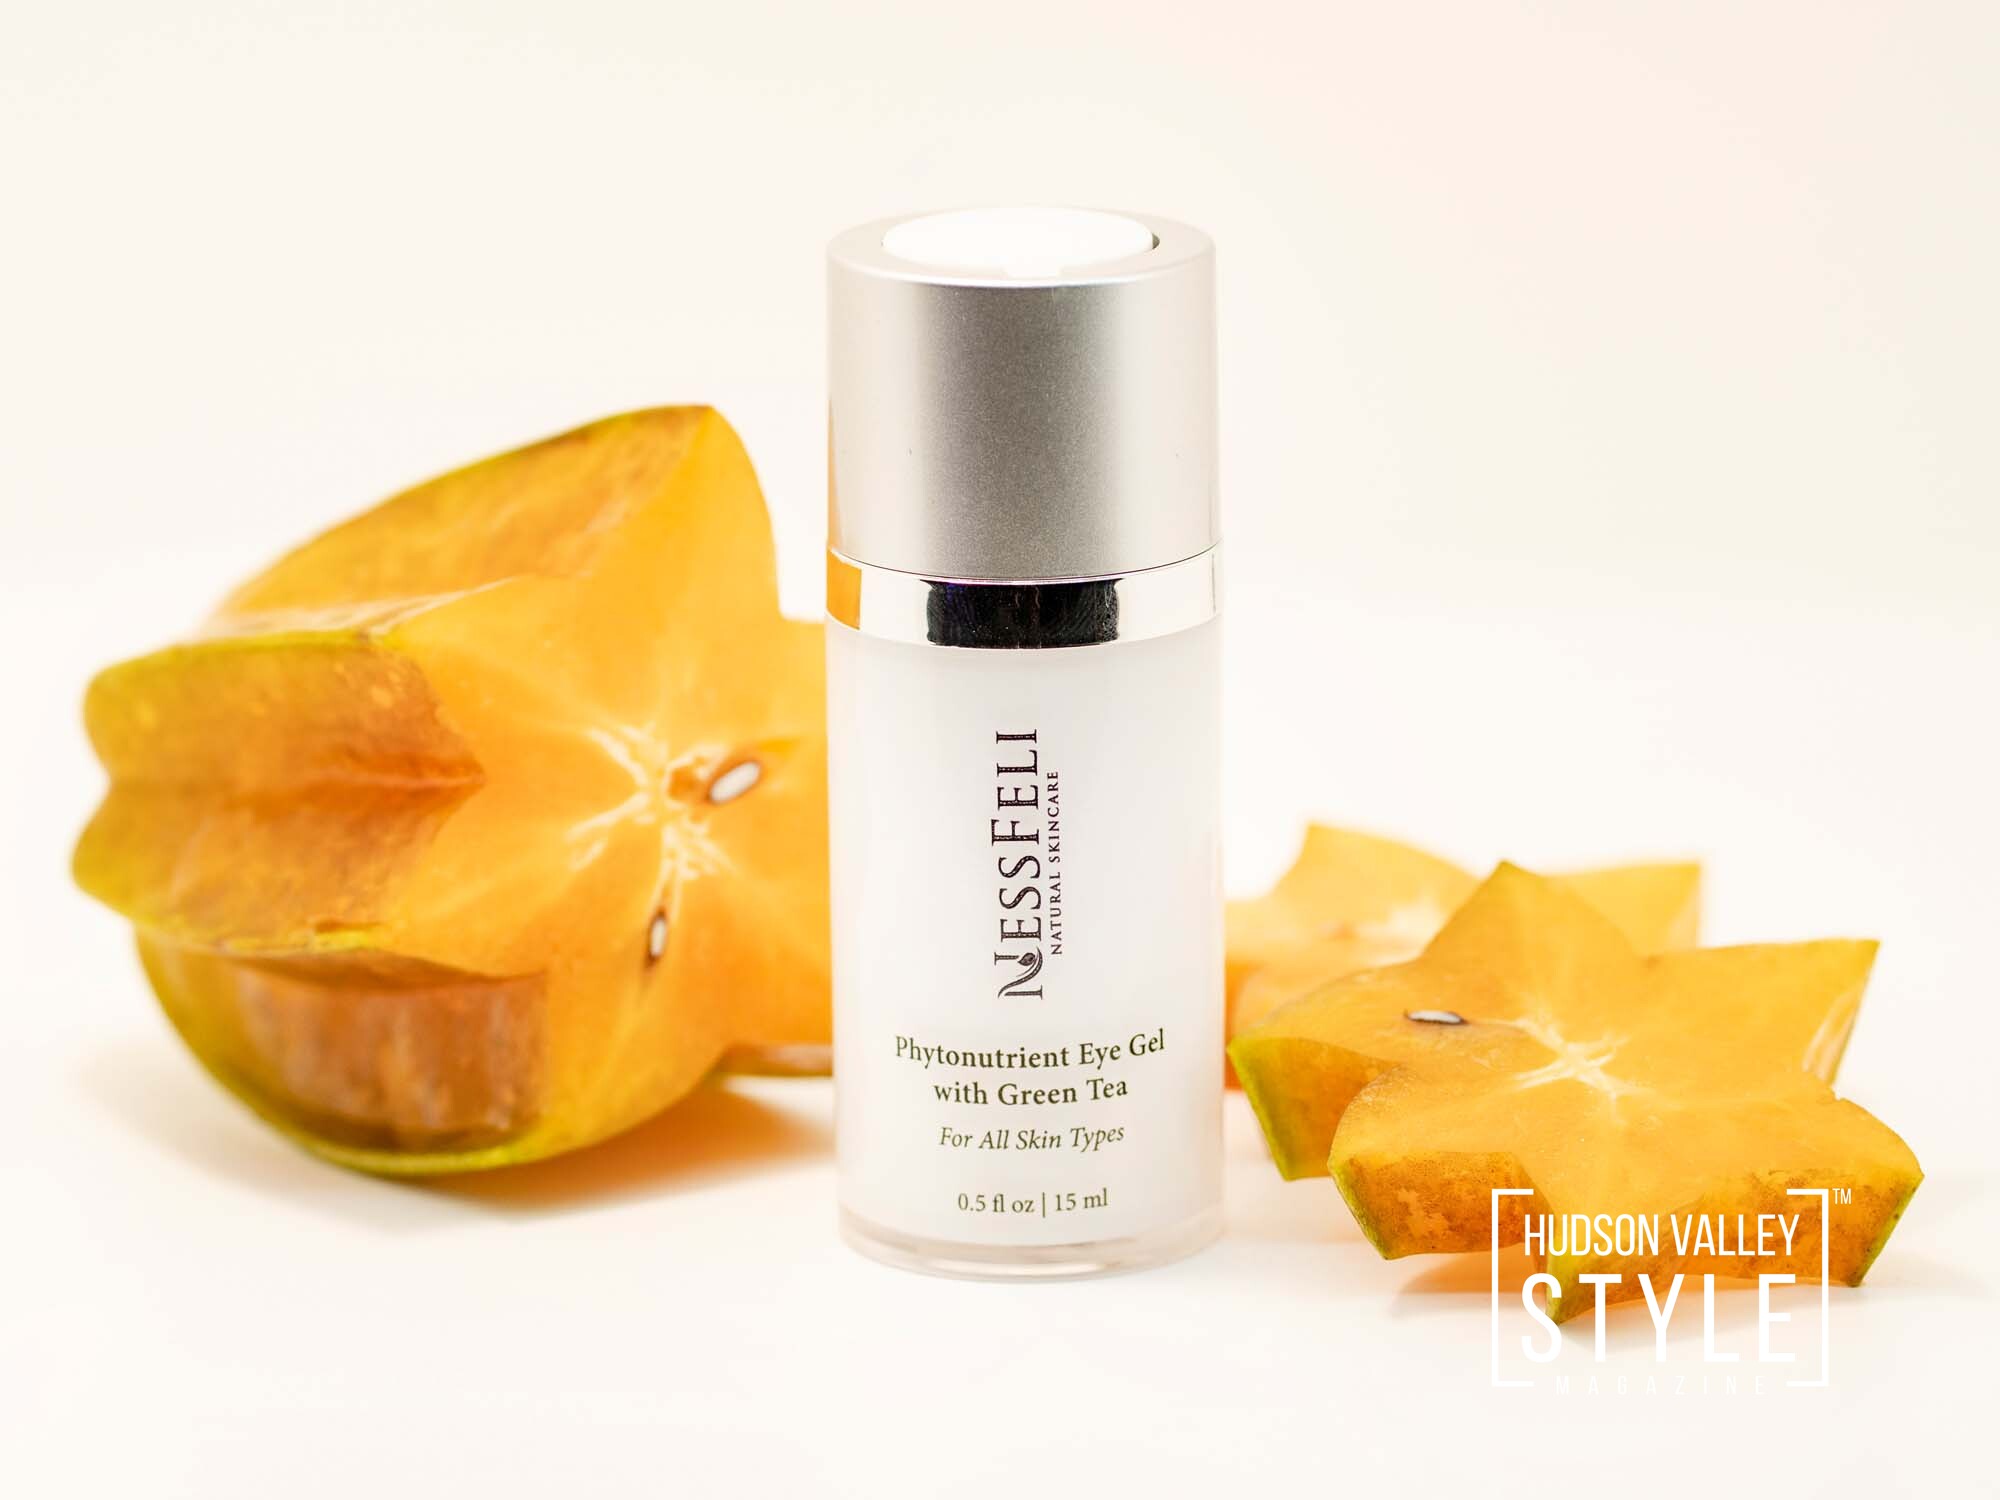 Phytonutrient Eye Gel with Green Tea by NessFeli Natural Skincare – Hudson Valley Style Magazine Gift Guide – Product Photography by Duncan Avenue Studios, New York